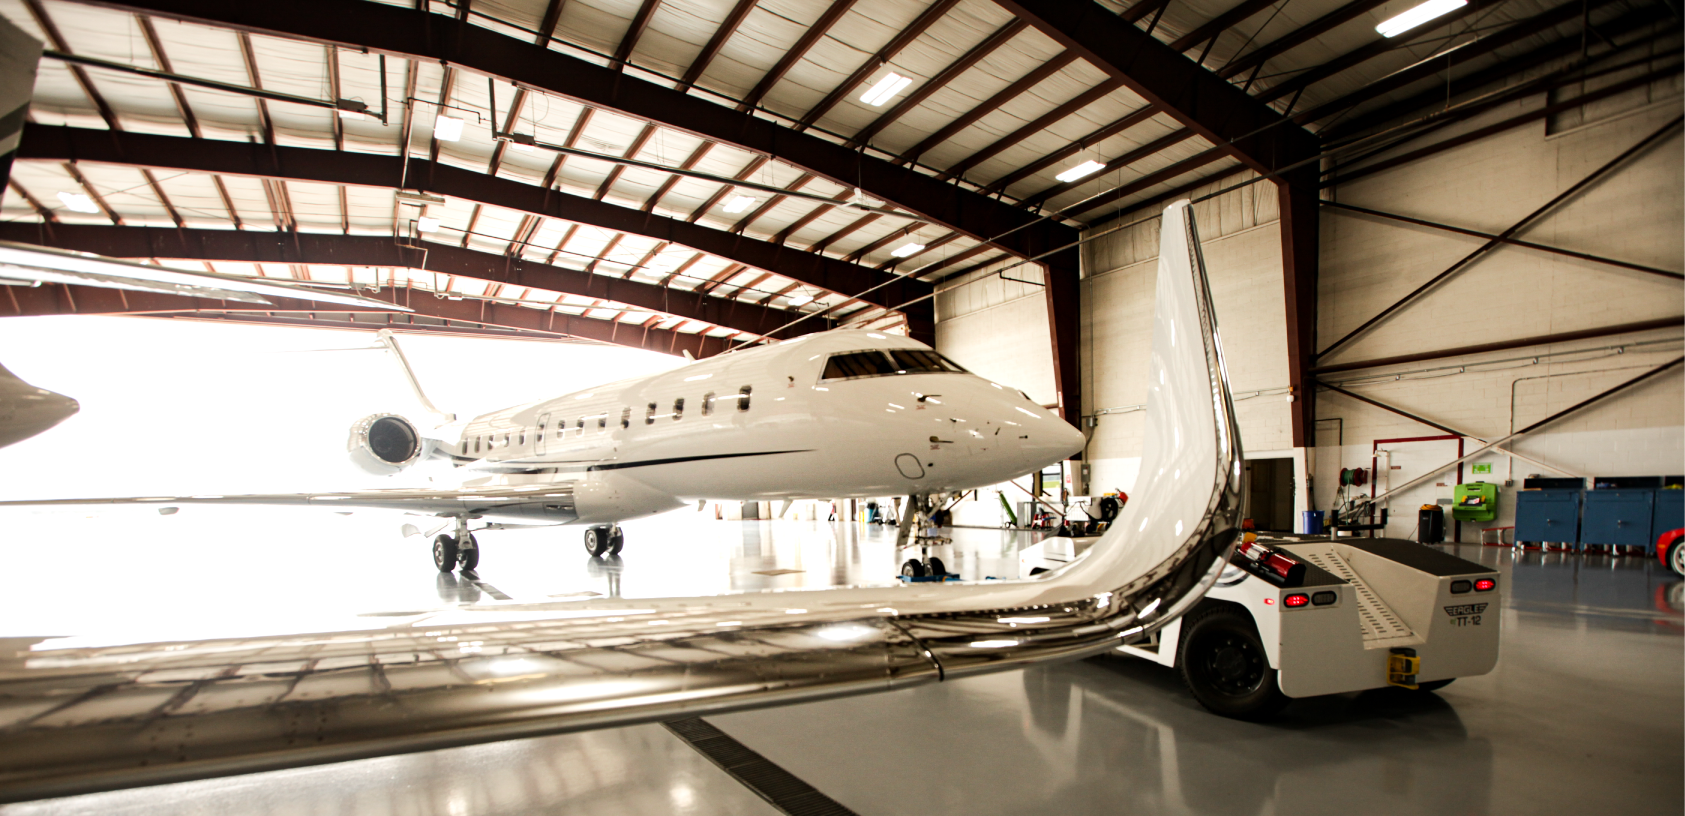 Five Ways Operators Can Retain Aircraft Value #4: Selecting the Right MRO